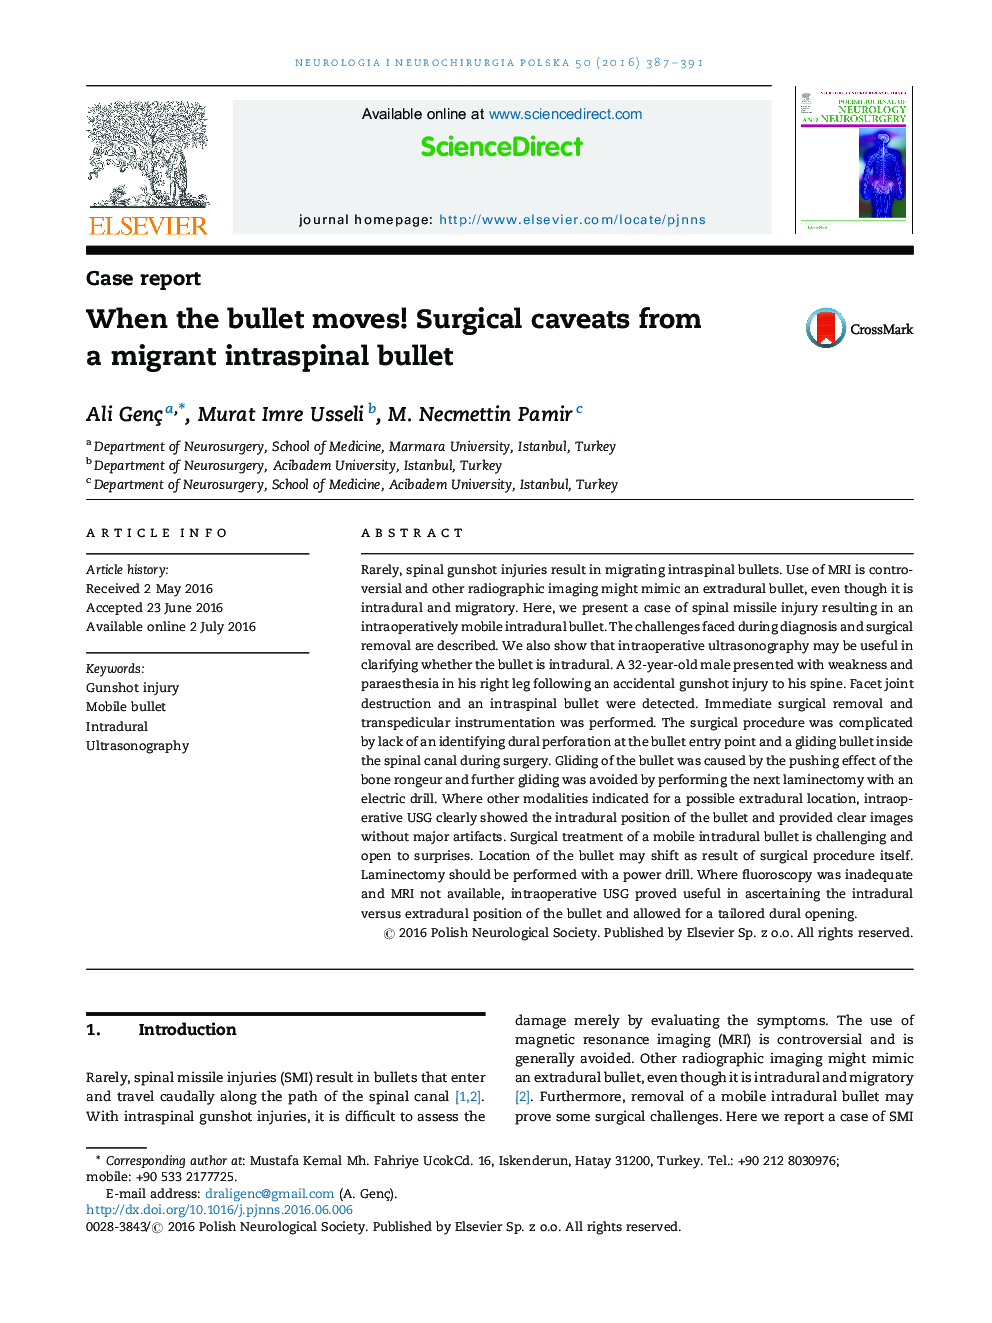 When the bullet moves! Surgical caveats from a migrant intraspinal bullet